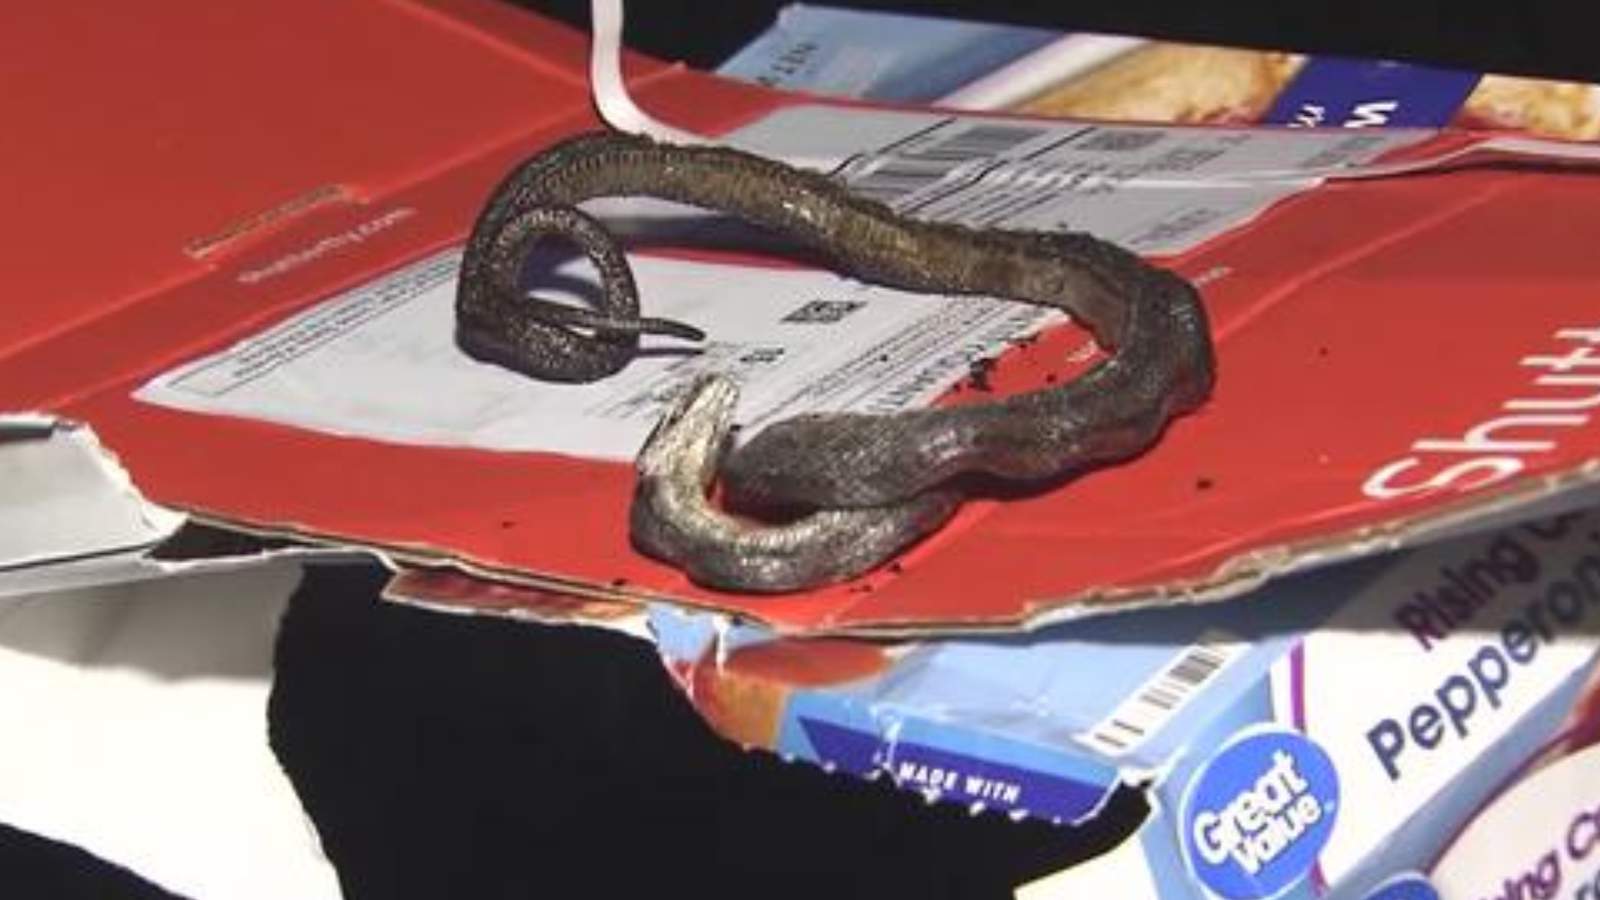 Family accidentally cooks snake in oven with pizza